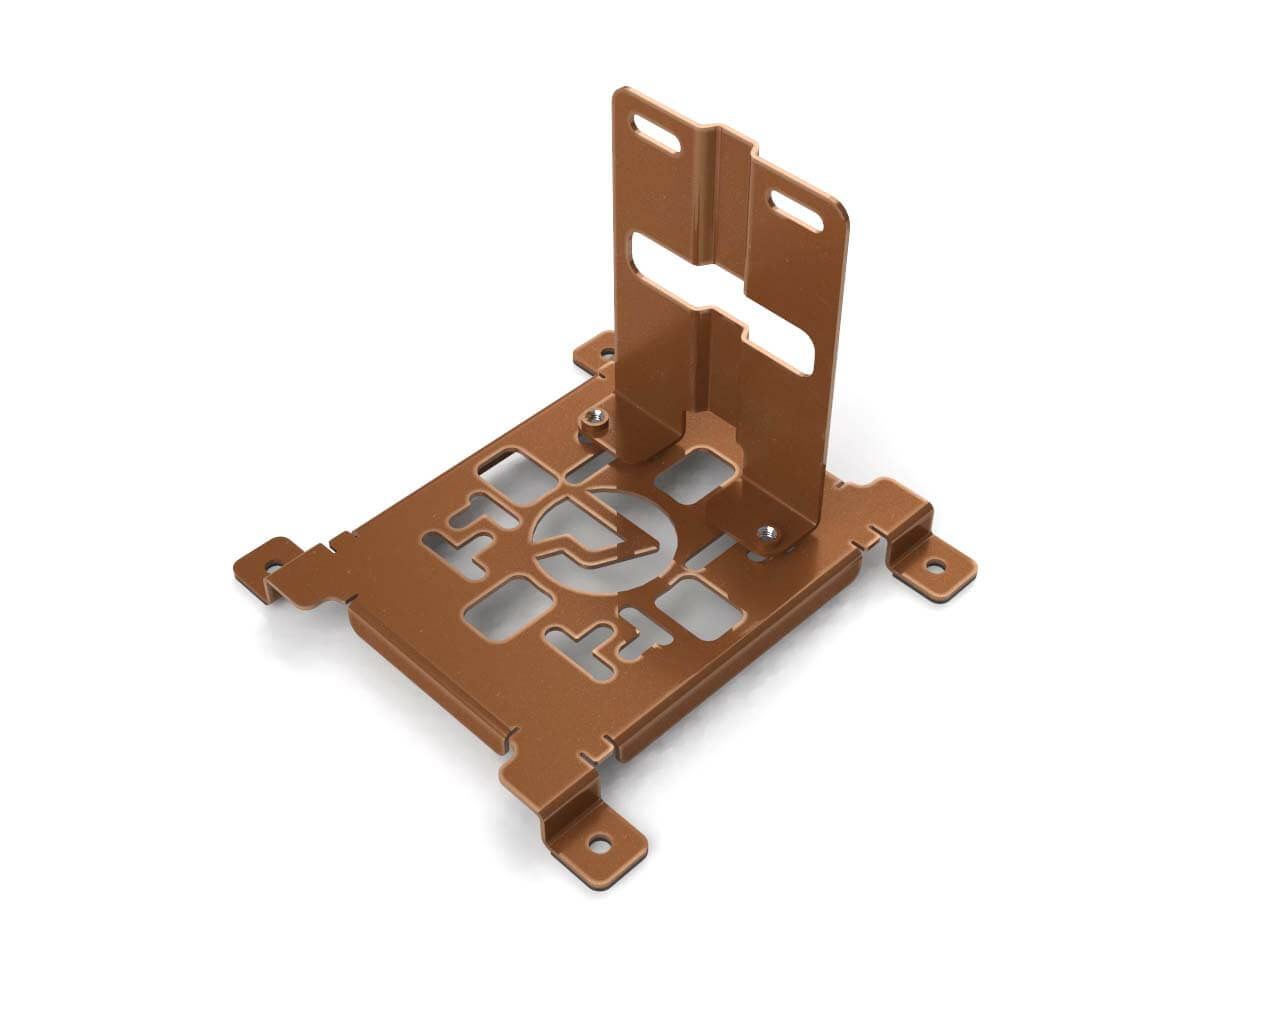 PrimoChill SX CTR2 Spider Mount Bracket Kit - 120mm Series - PrimoChill - KEEPING IT COOL Copper